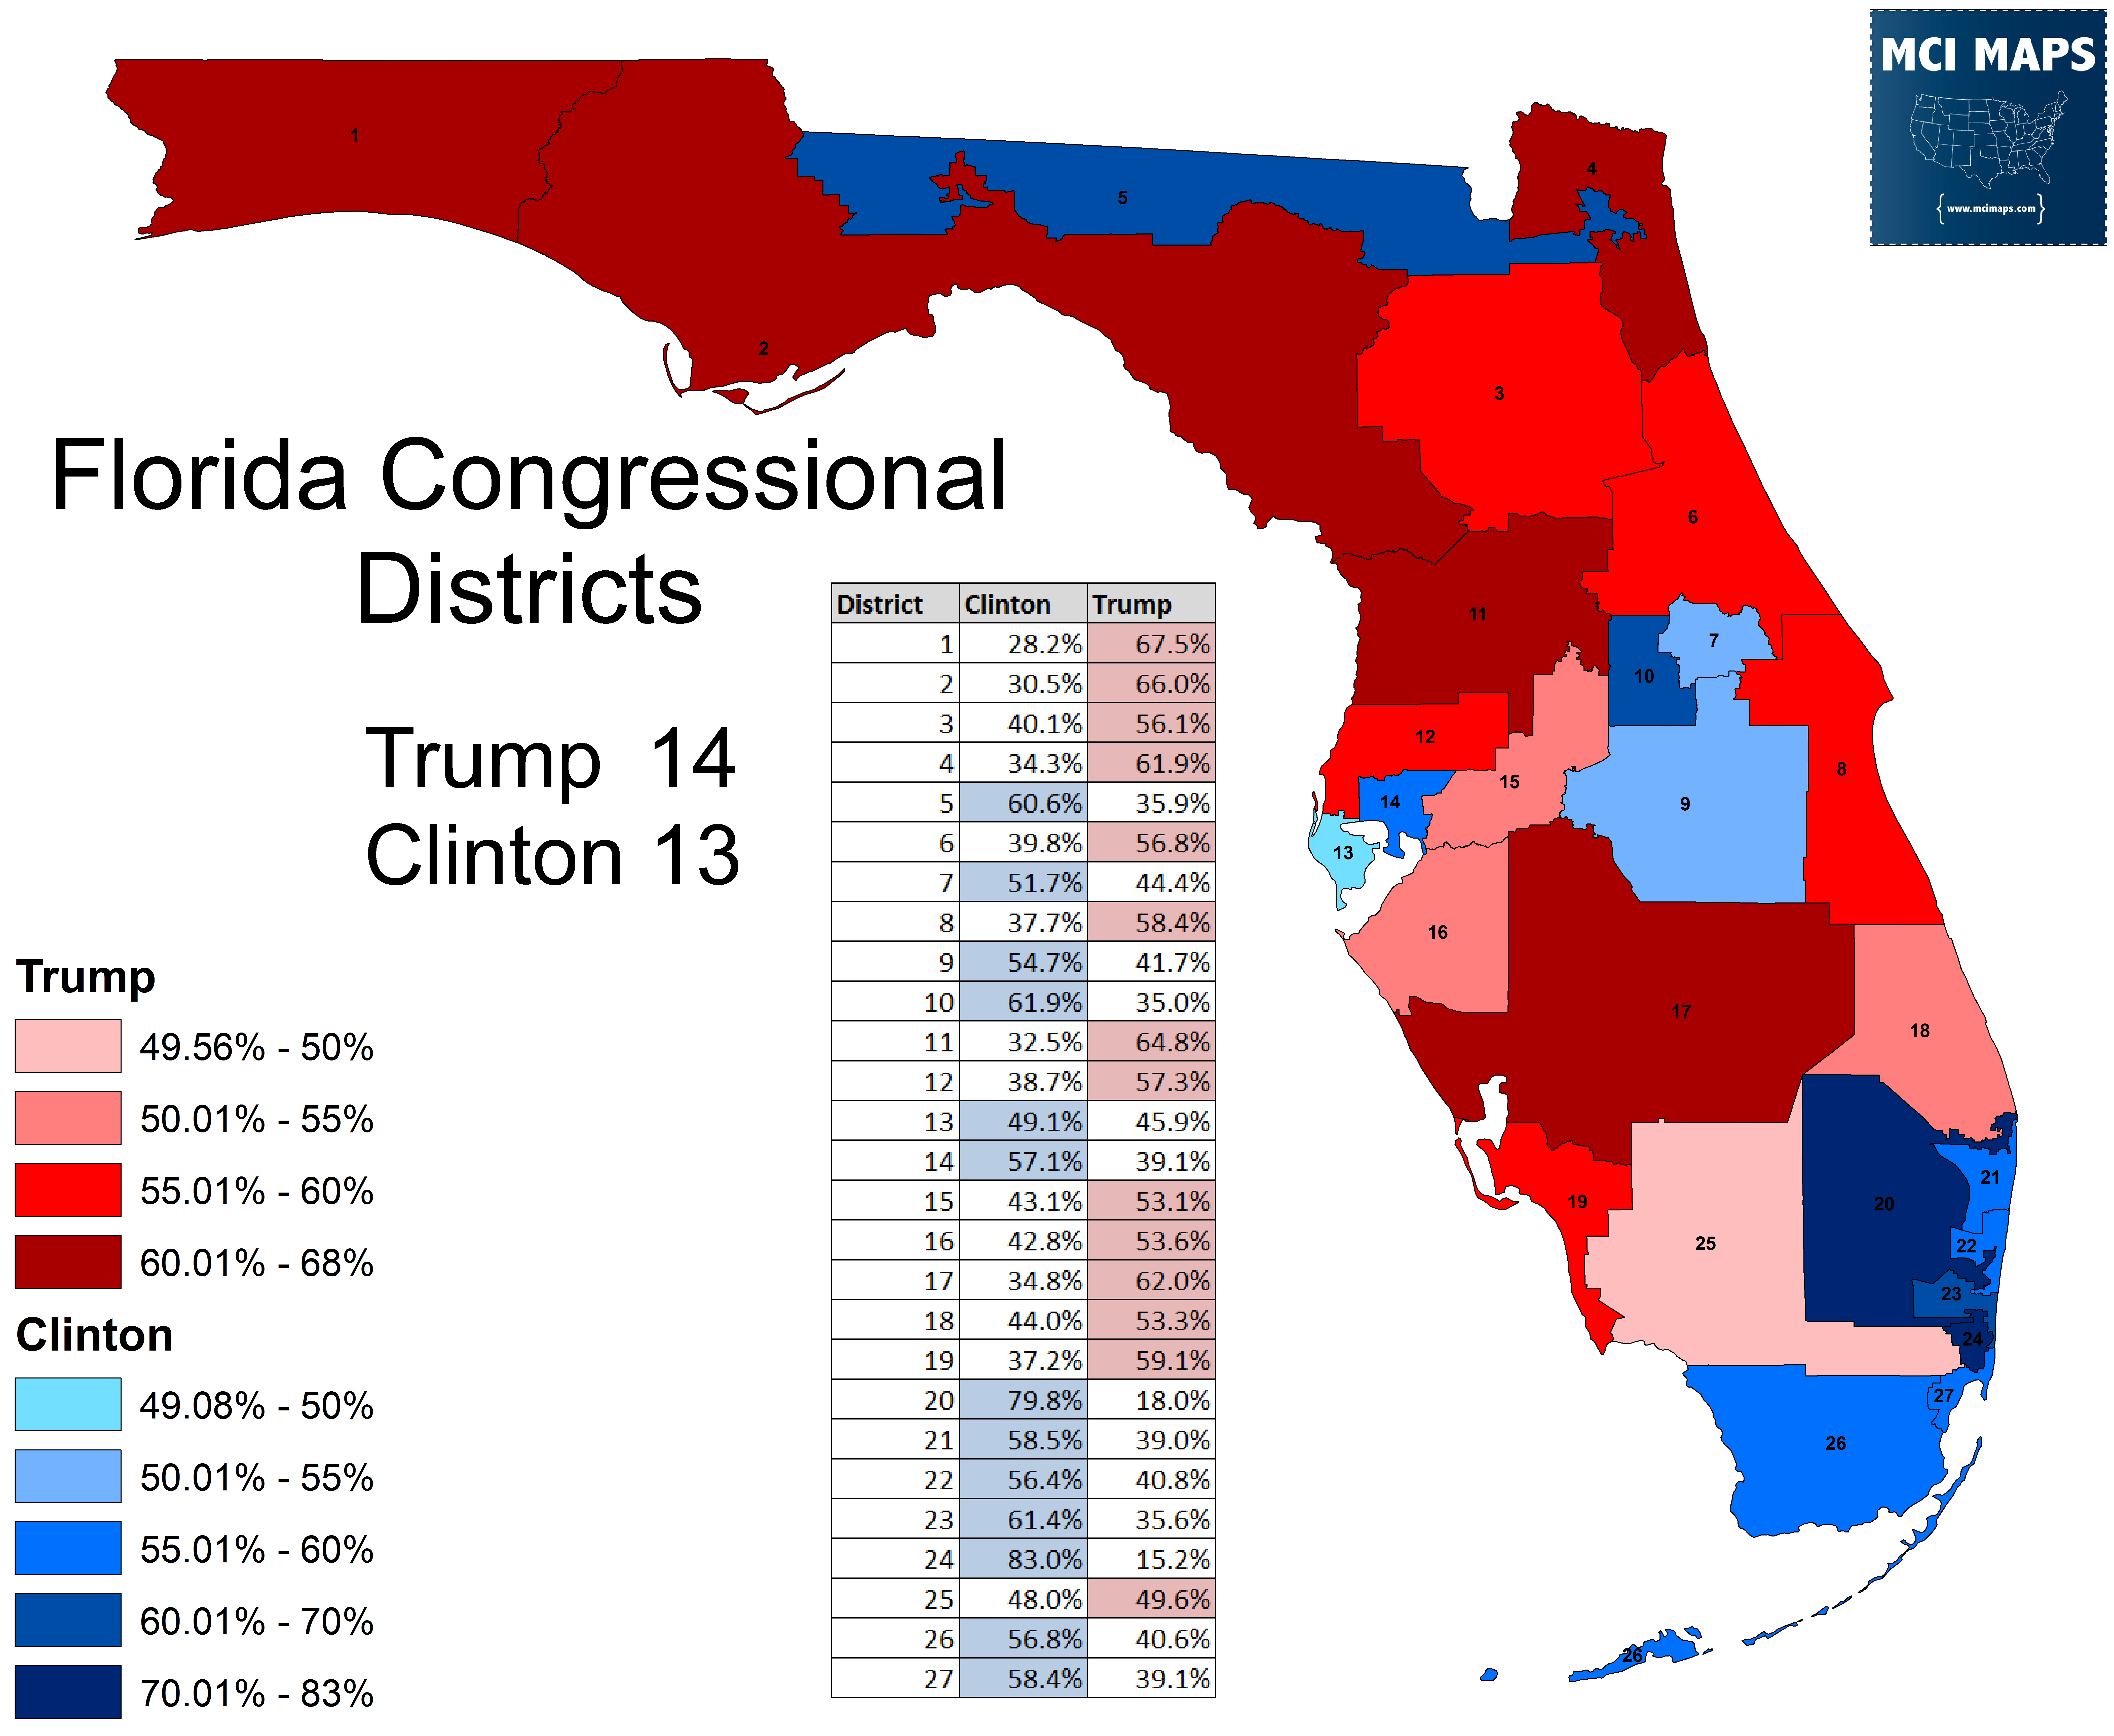 Florida&amp;#039;s Congressional District Rankings For 2018 – Mci Maps - Florida Congressional Districts Map 2018